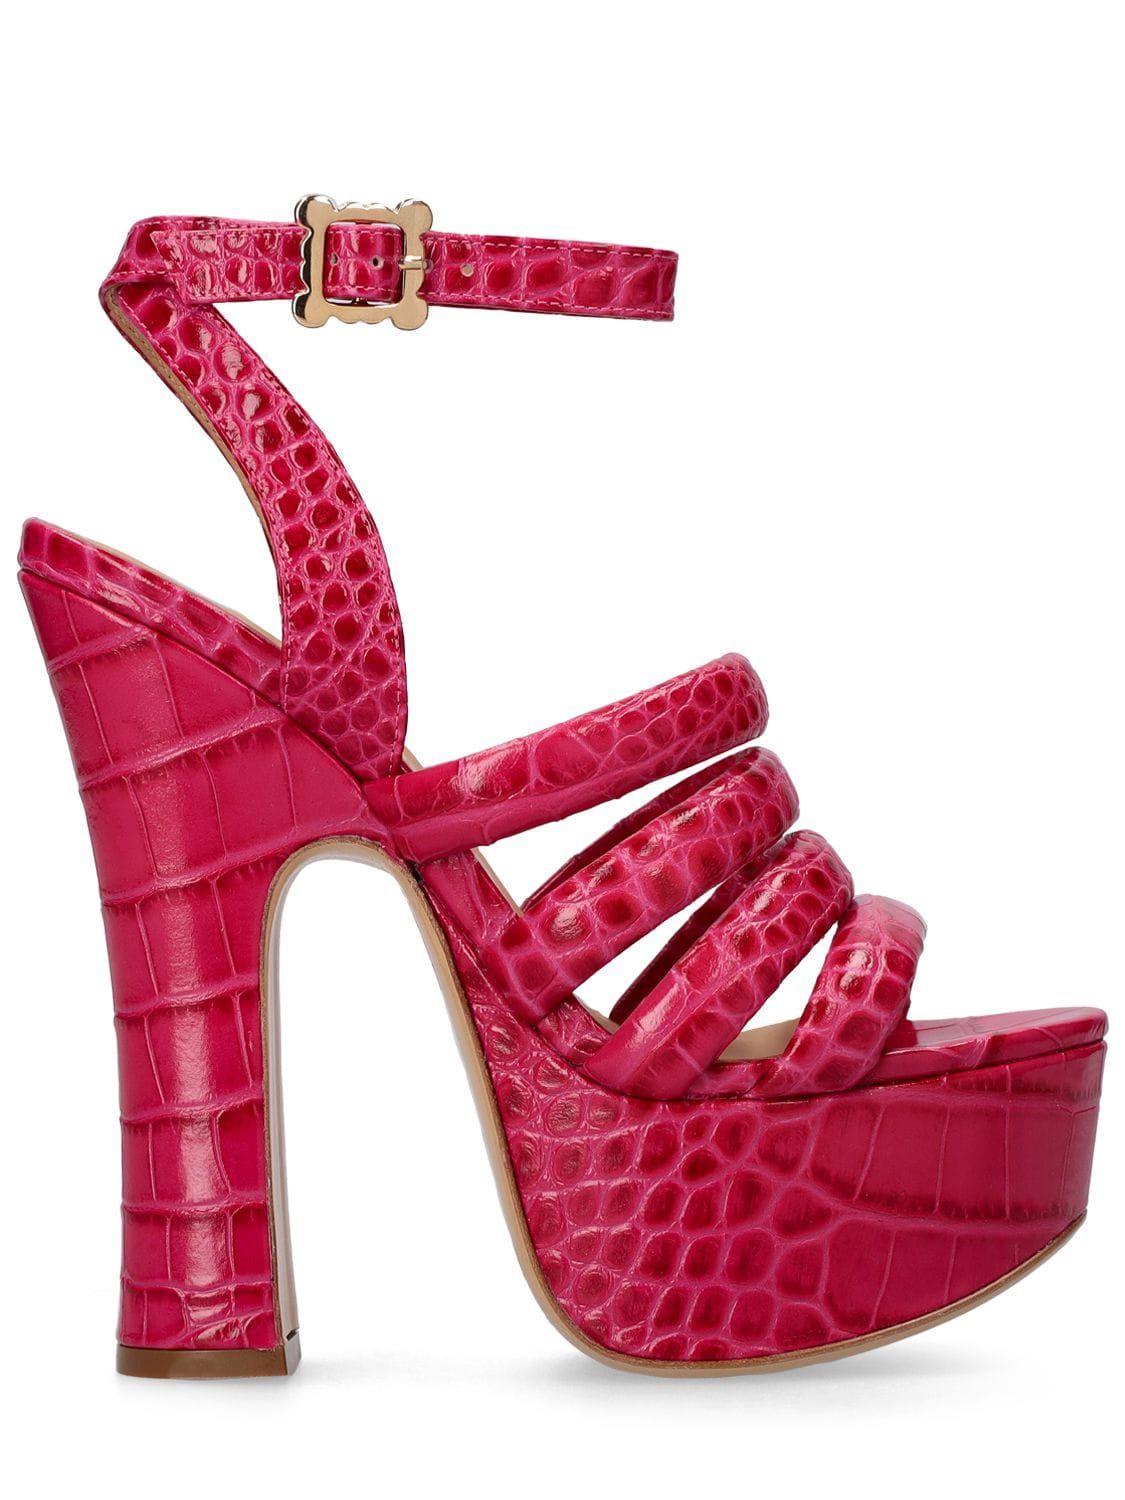 Vivienne Westwood 150mm Britney Embossed Leather Sandals in Pink | Lyst